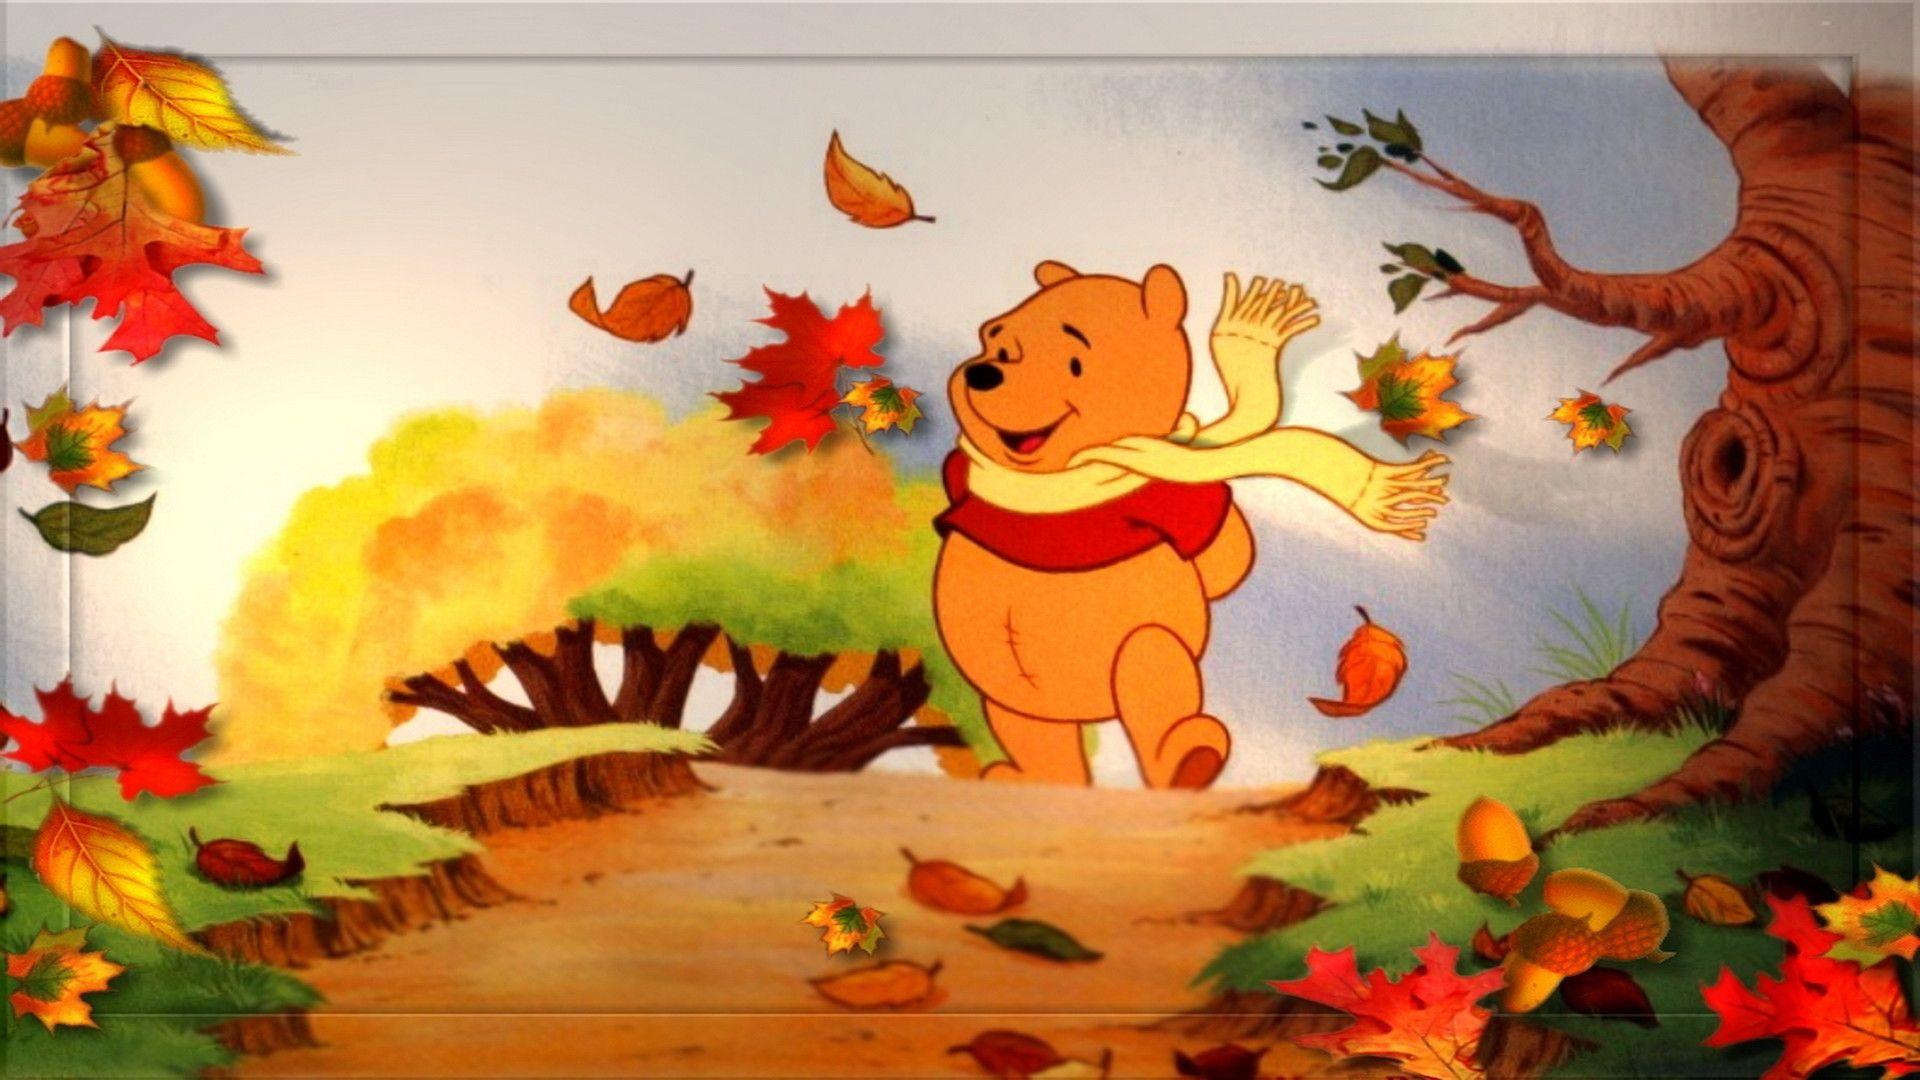 Disney Thanksgiving Wallpaper background picture